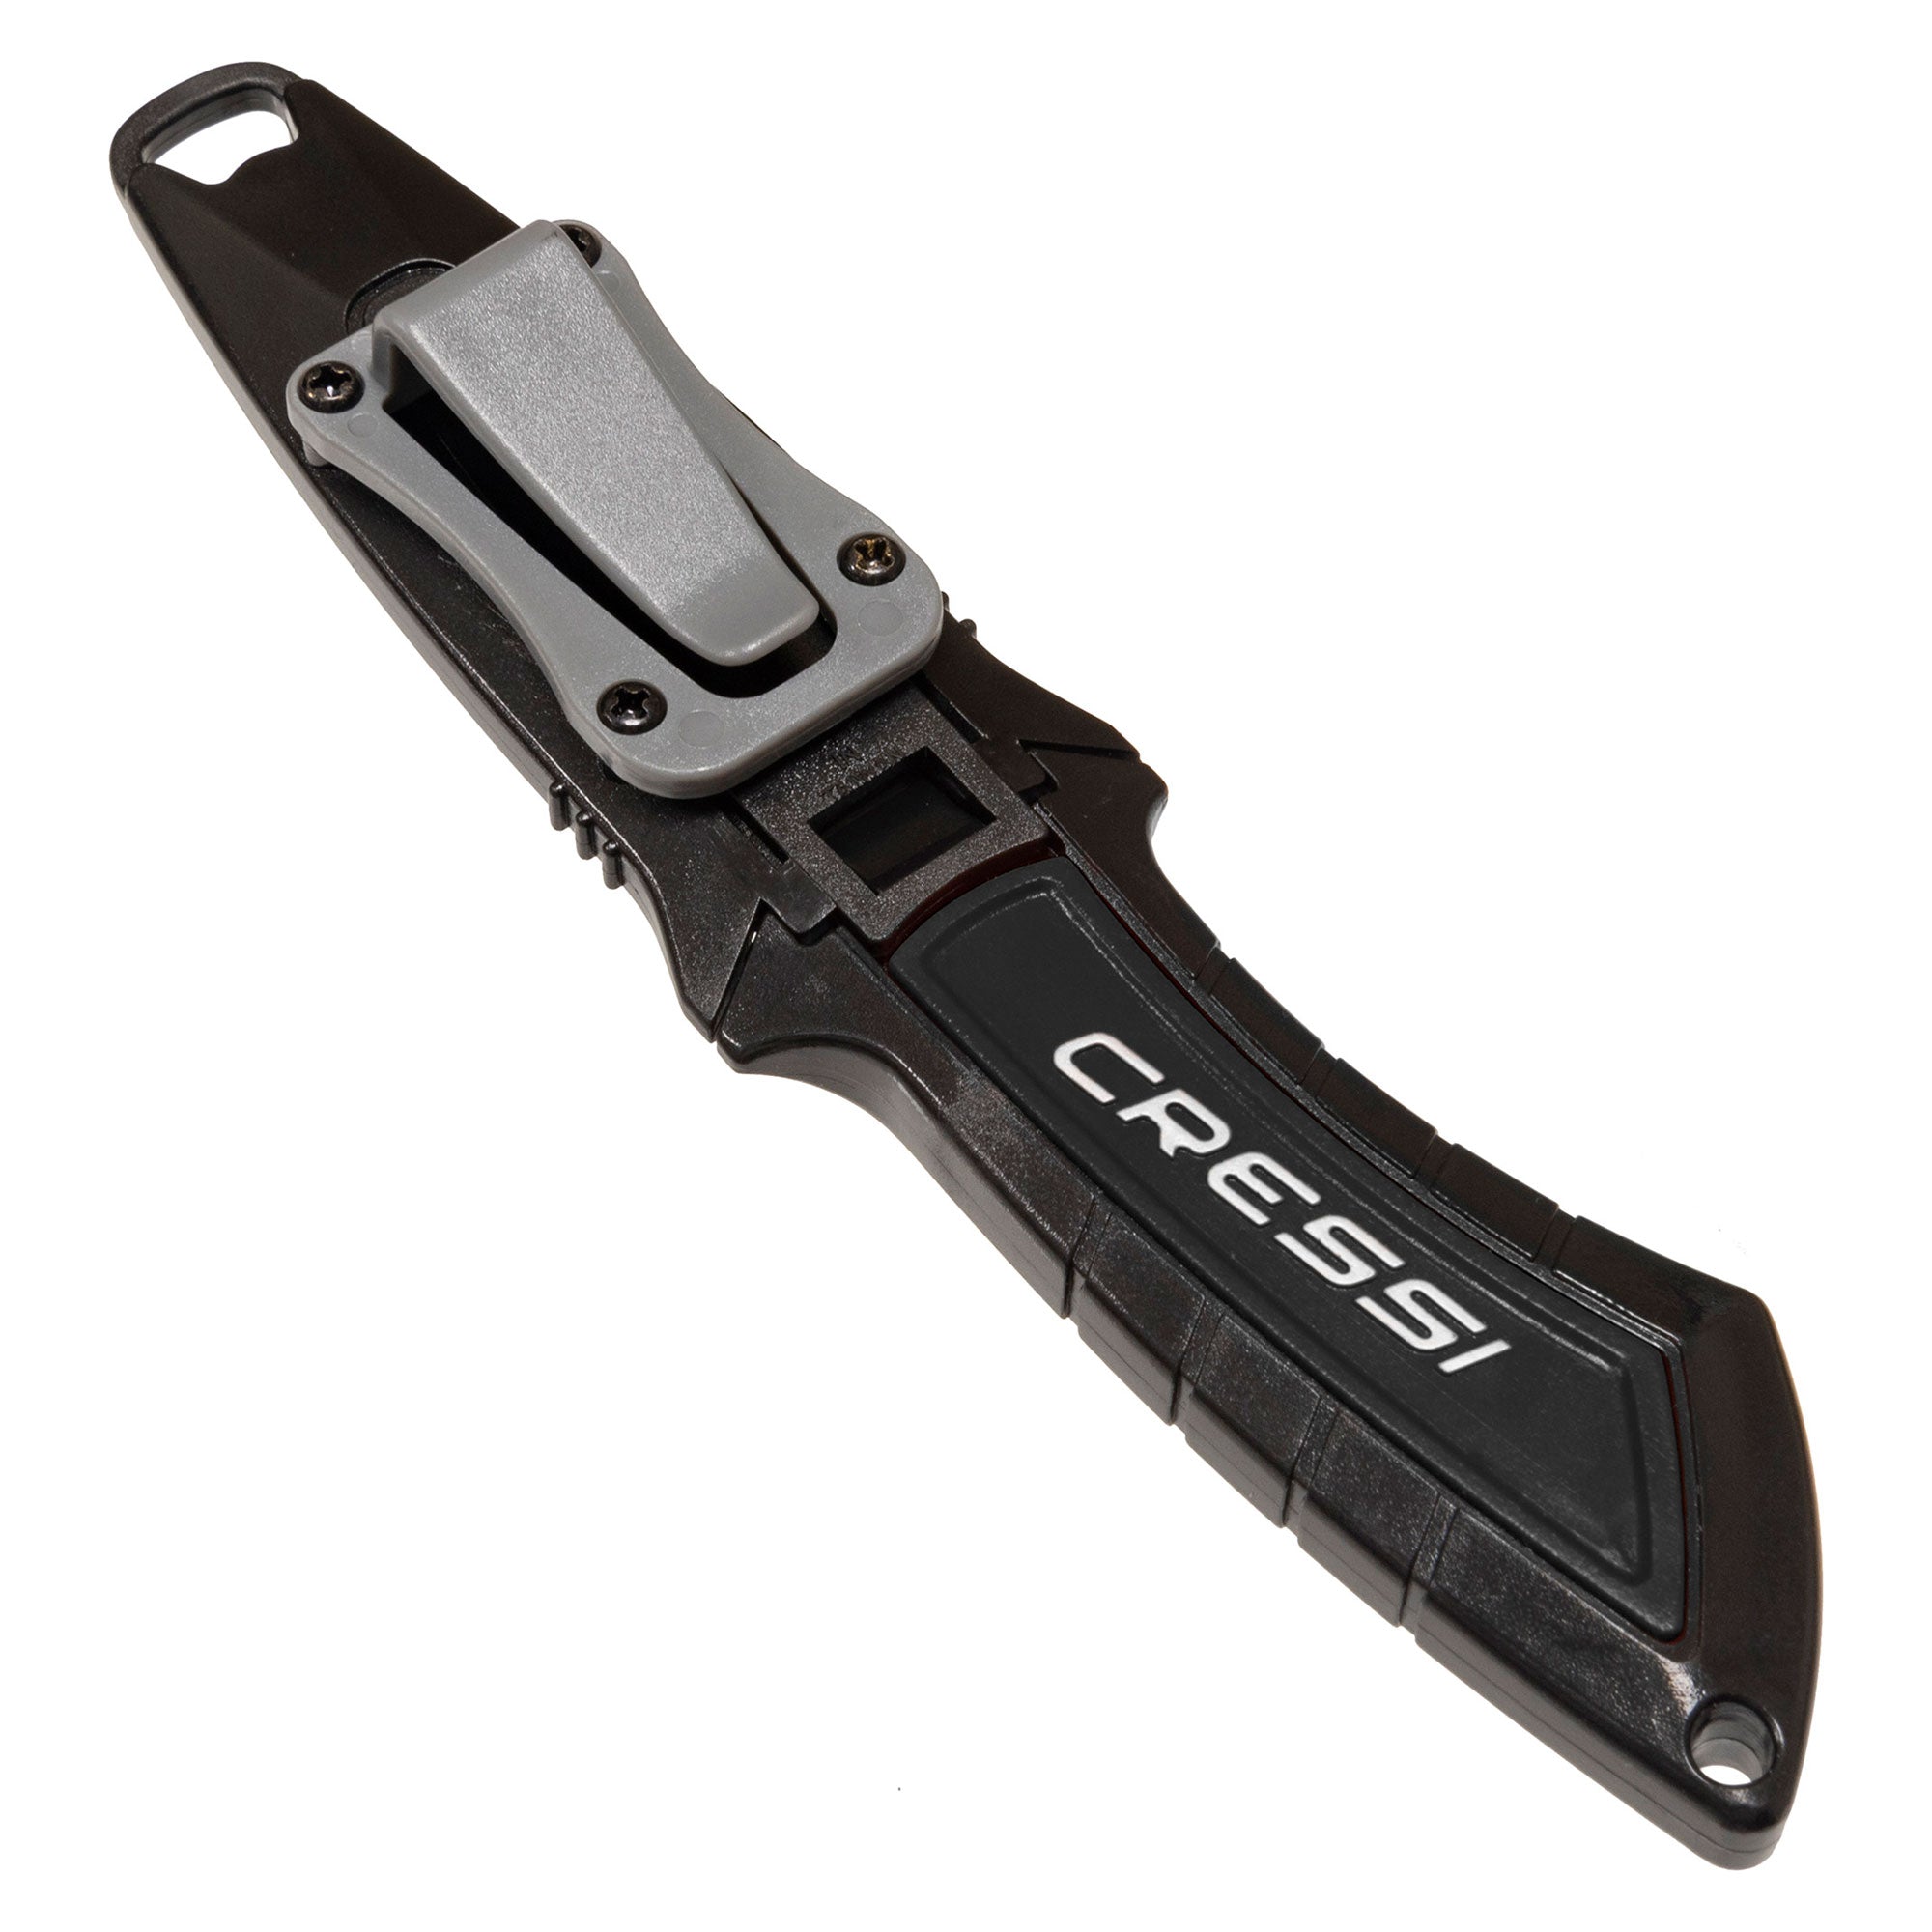 Cressi Lima Stainless Steel Scuba Dive Knife - DIPNDIVE